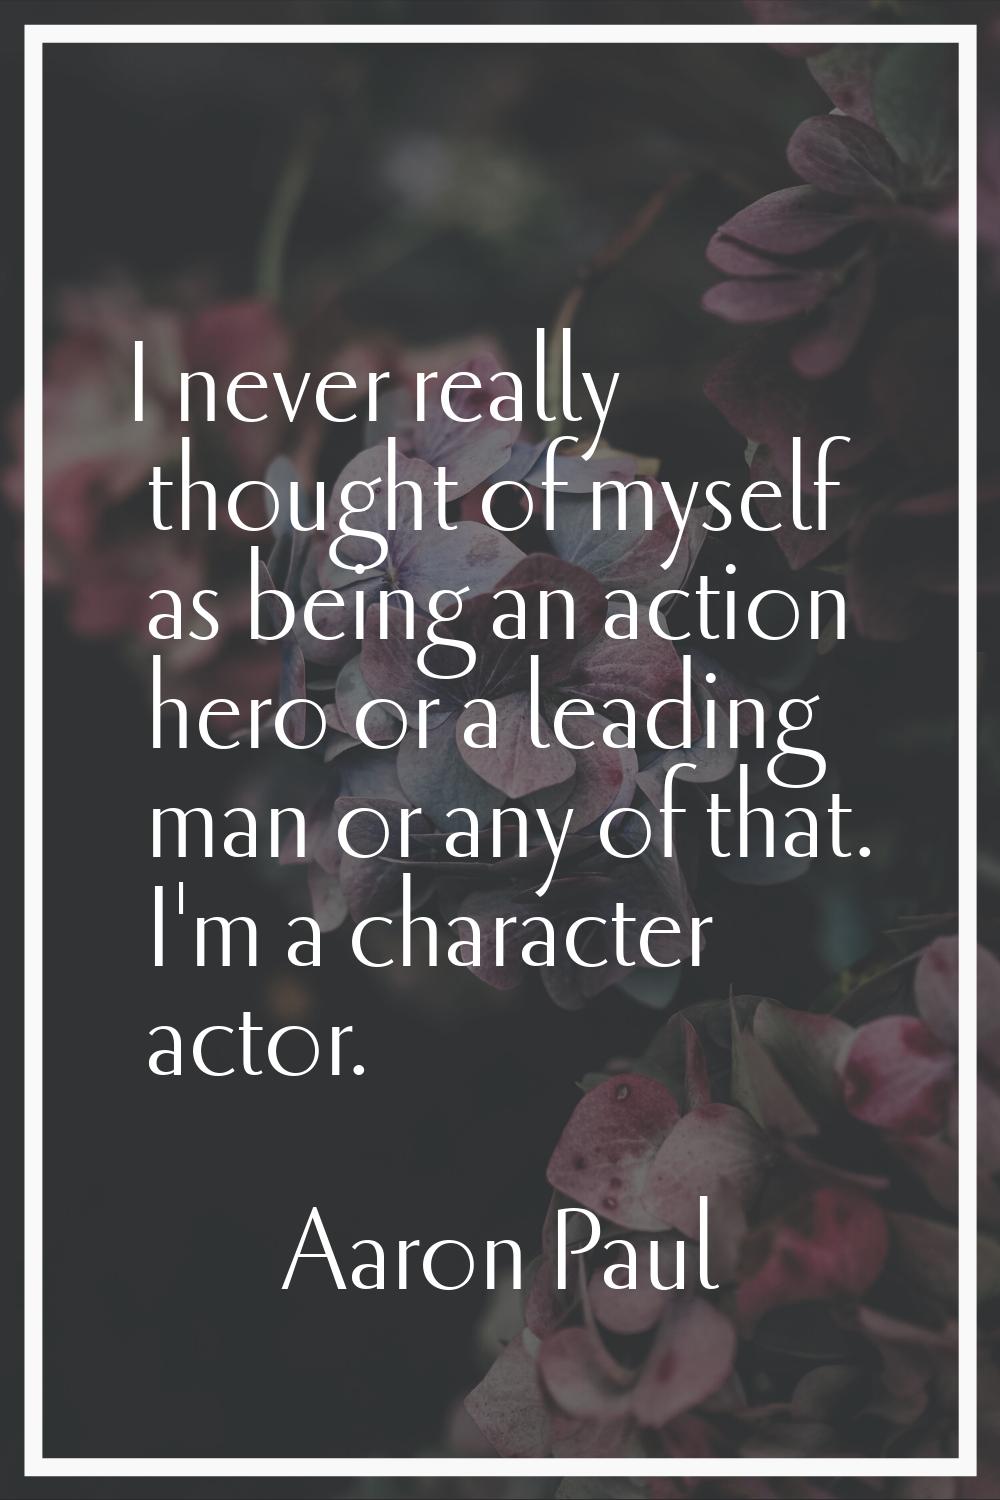 I never really thought of myself as being an action hero or a leading man or any of that. I'm a cha